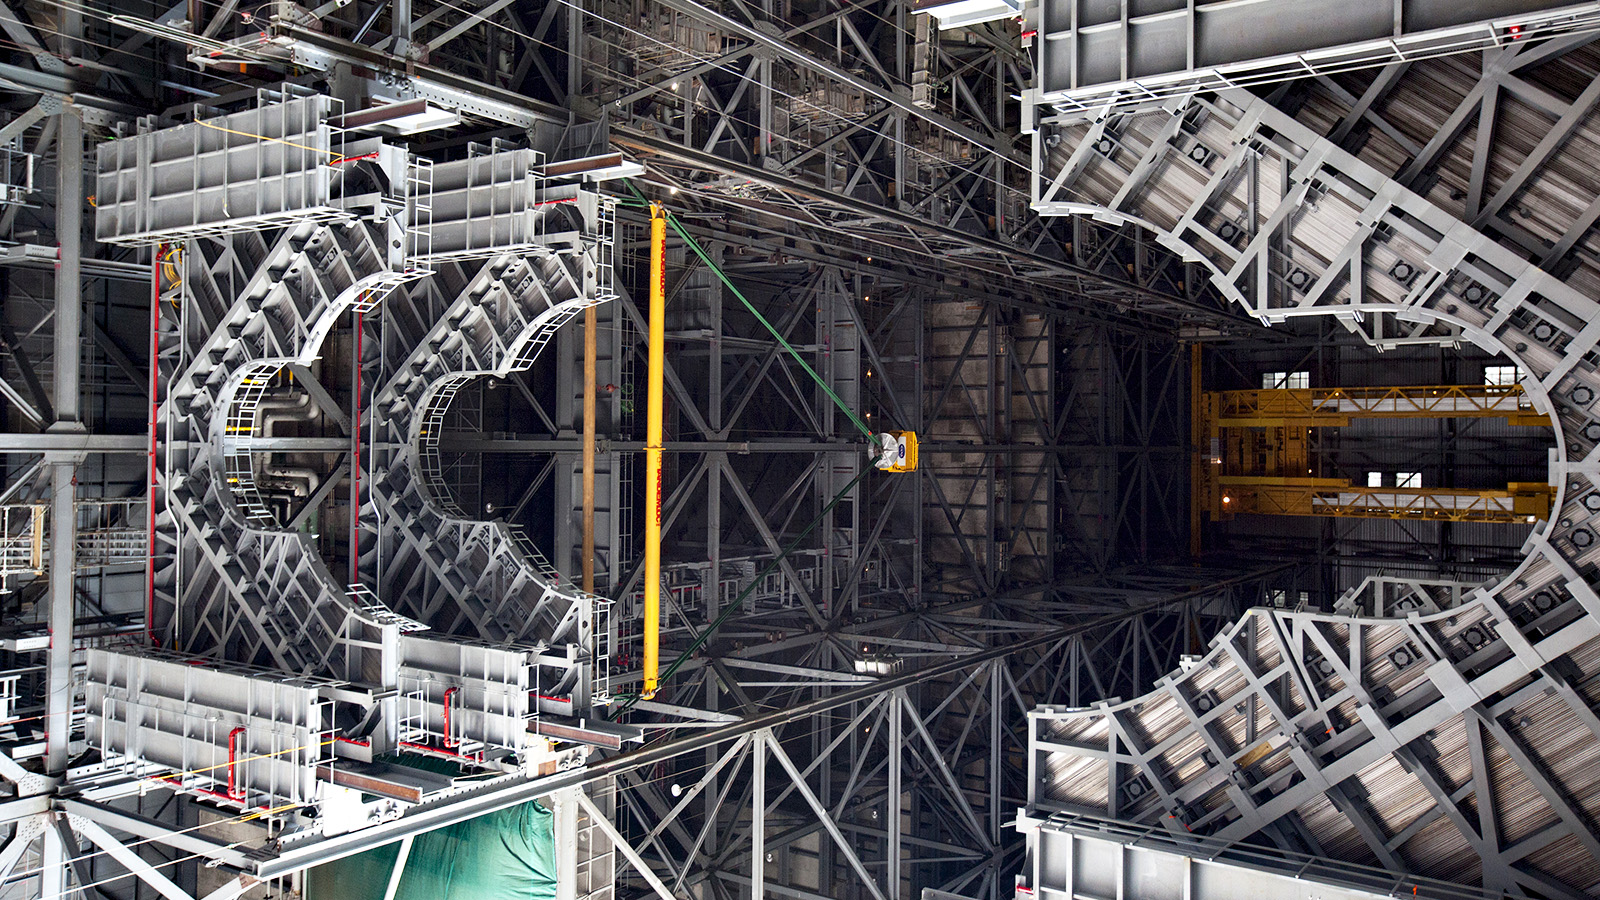 NASA’s New Garage Looks Like The Inside Of The Death Star